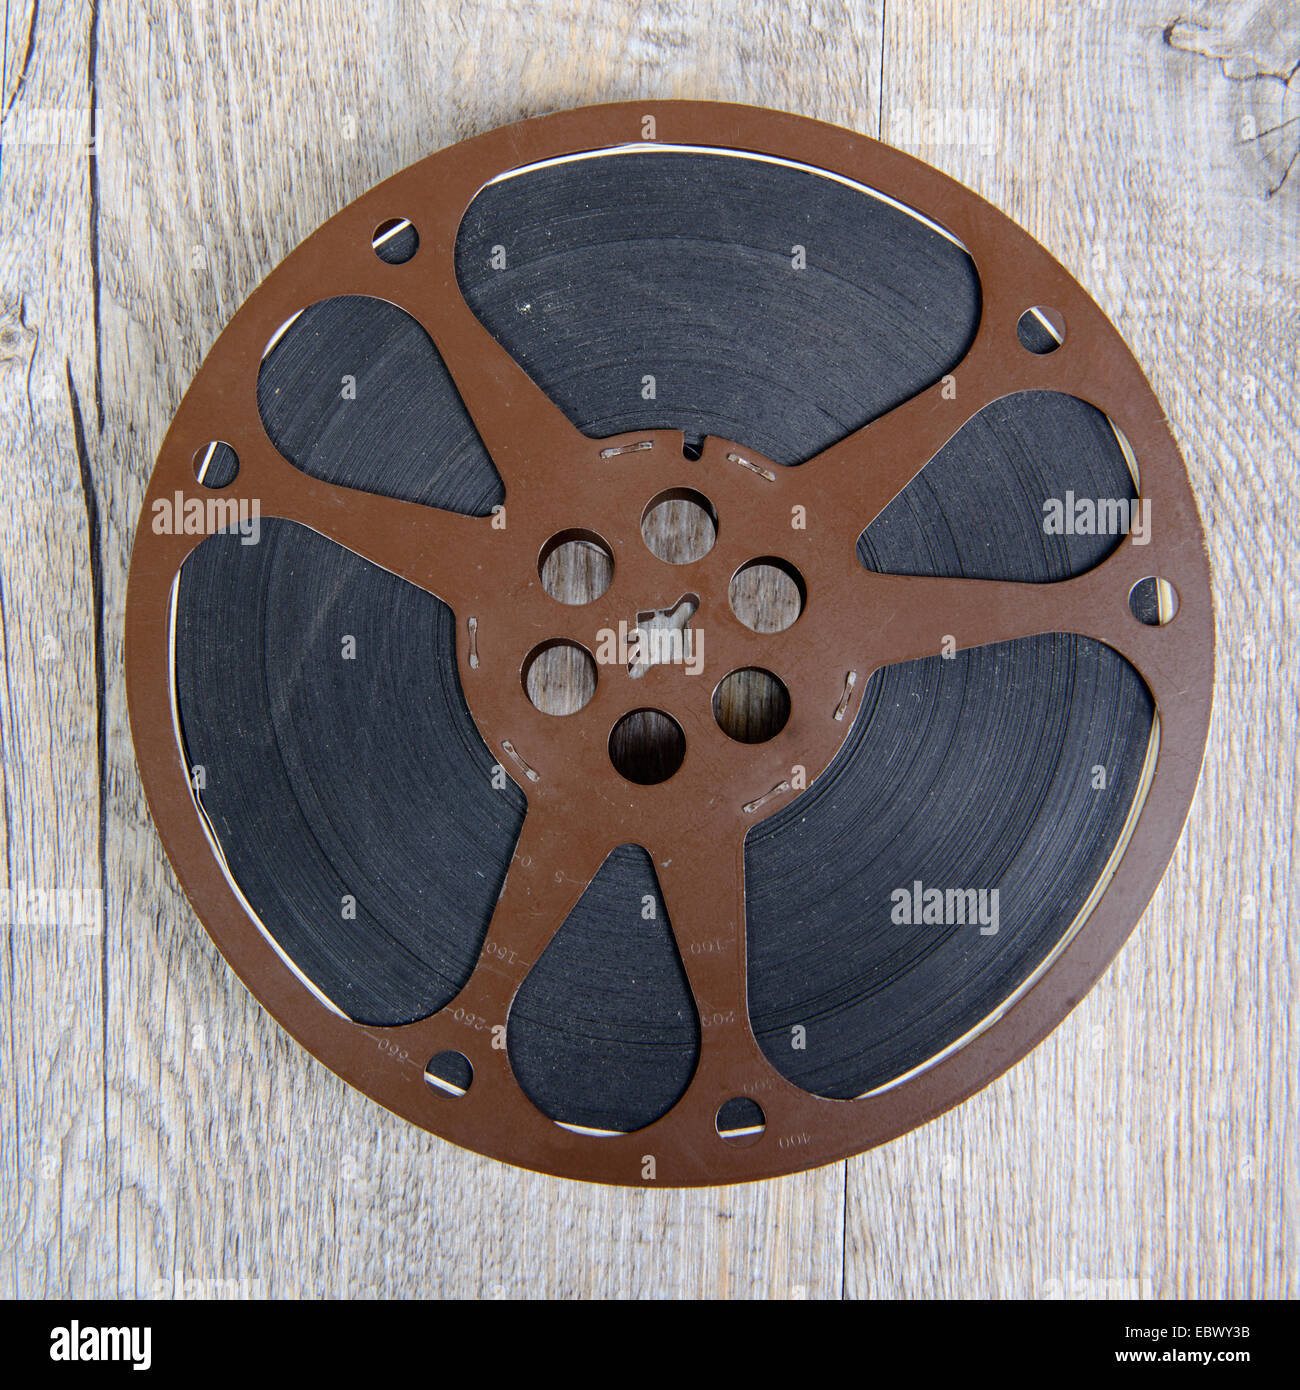 Vintage 16mm Movie Film of Pittsburgh Oakland With 10 Inch Reel